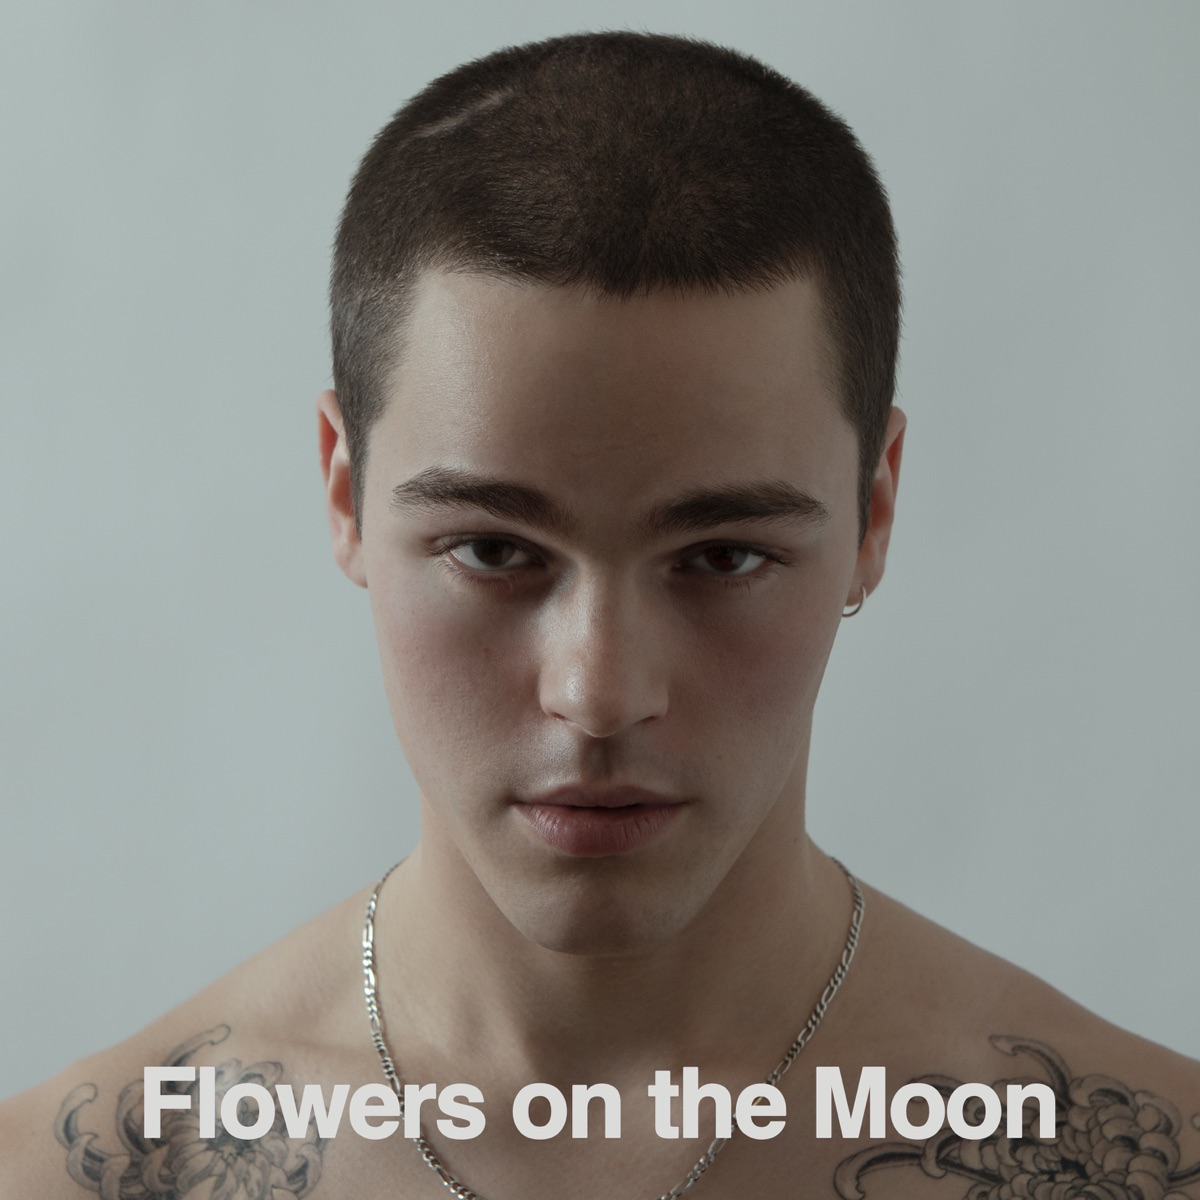 AJ Mitchell’s “Flowers on the Moon” Mediocre at Best 